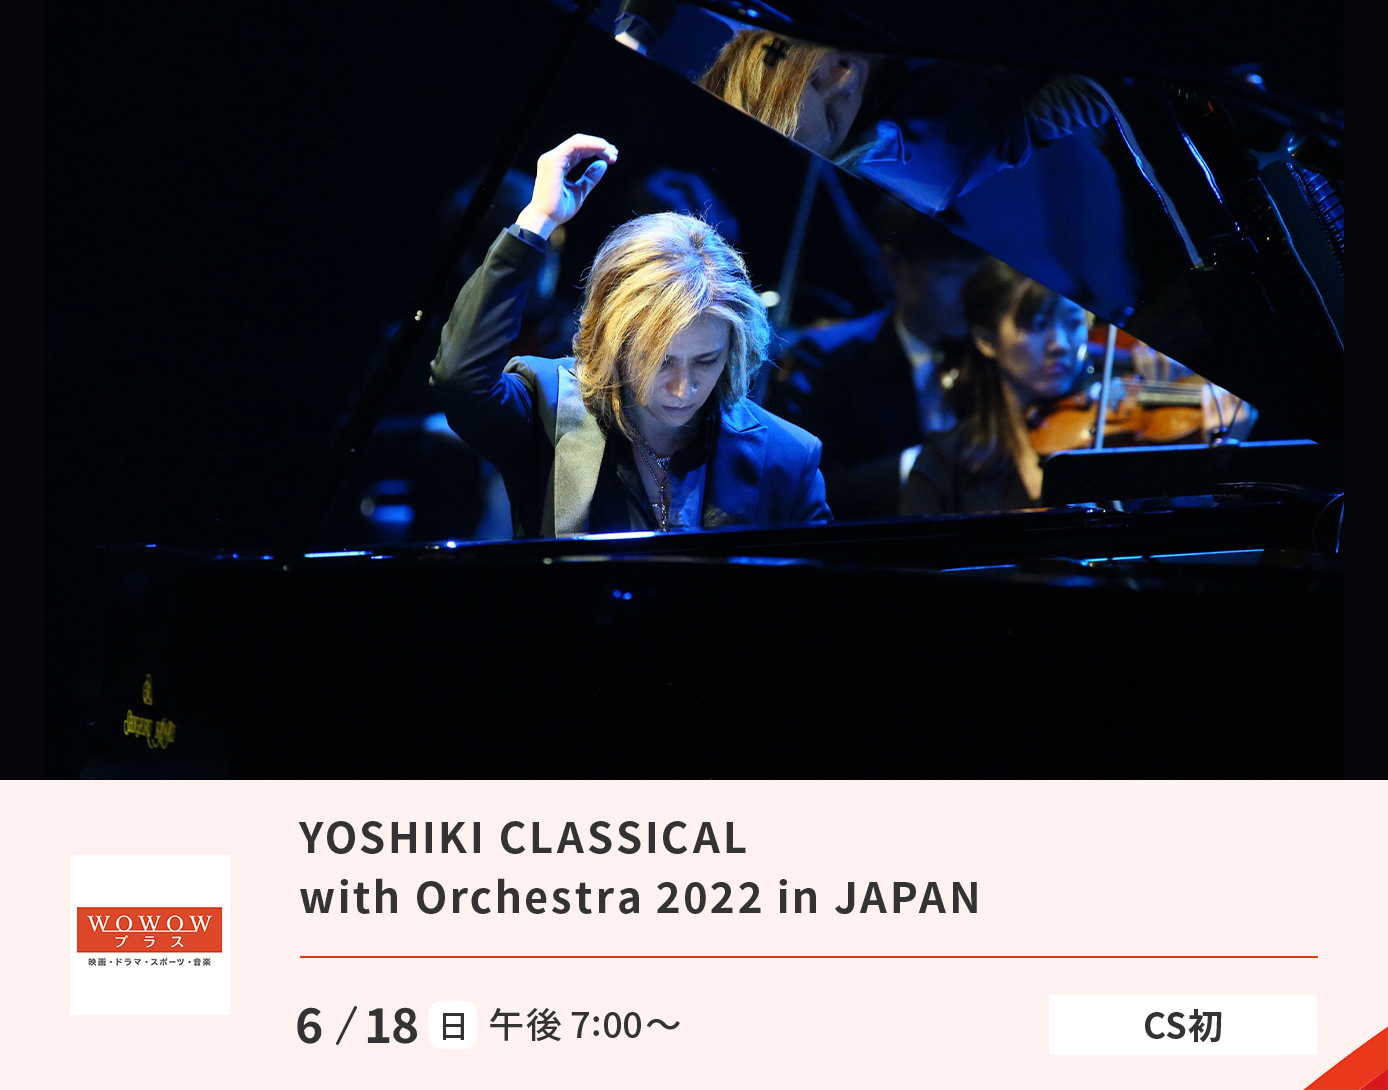 YOSHIKI CLASSICAL with Orchestra 2022 in JAPAN